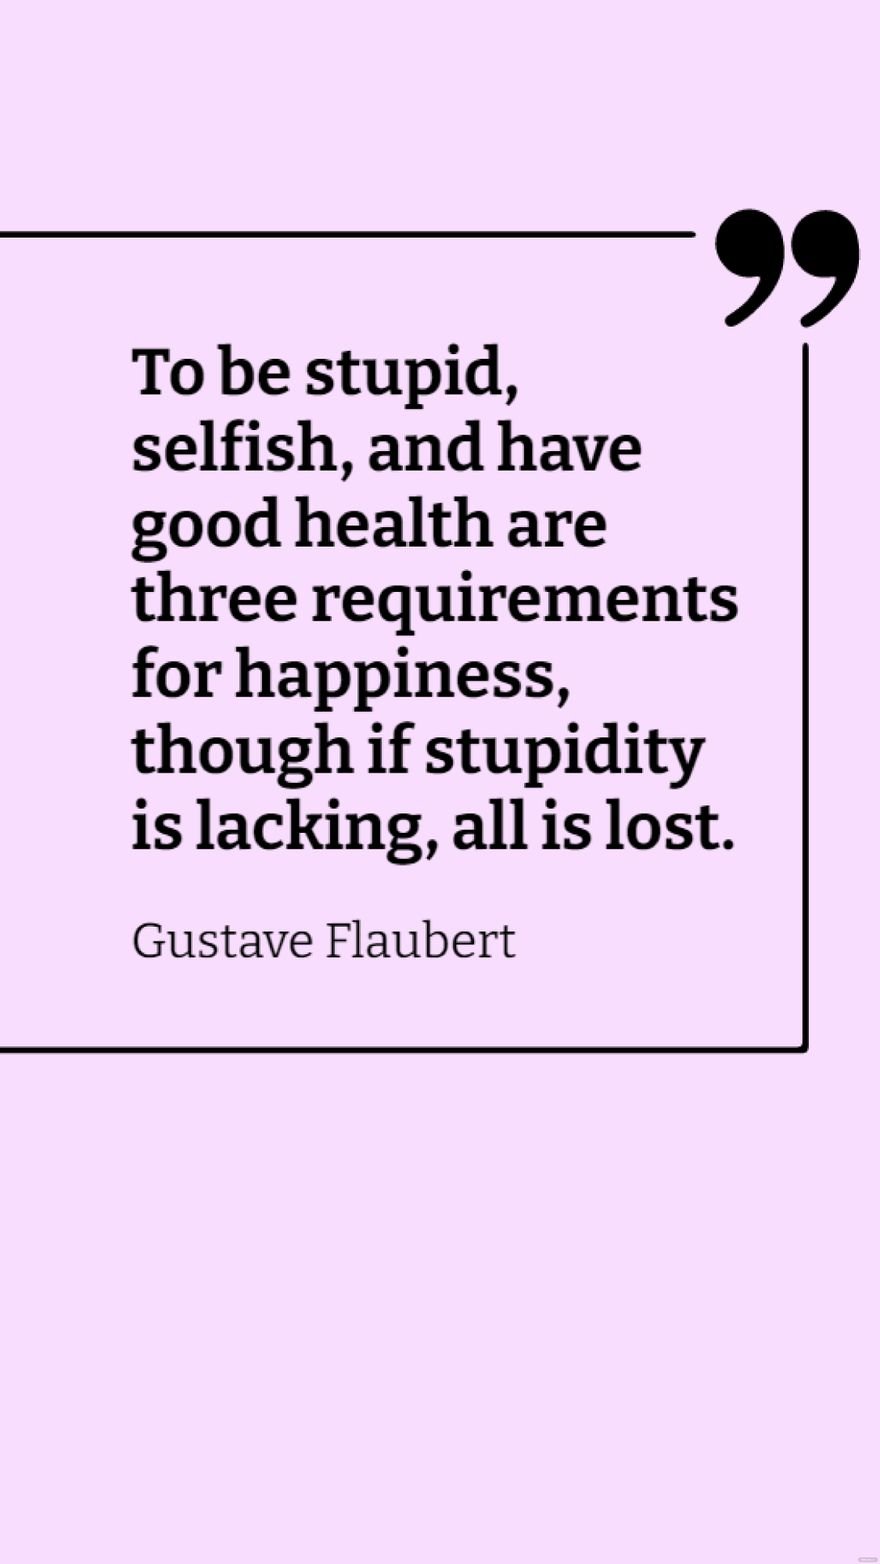 Free Gustave Flaubert - To be stupid, selfish, and have good health are three requirements for happiness, though if stupidity is lacking, all is lost.